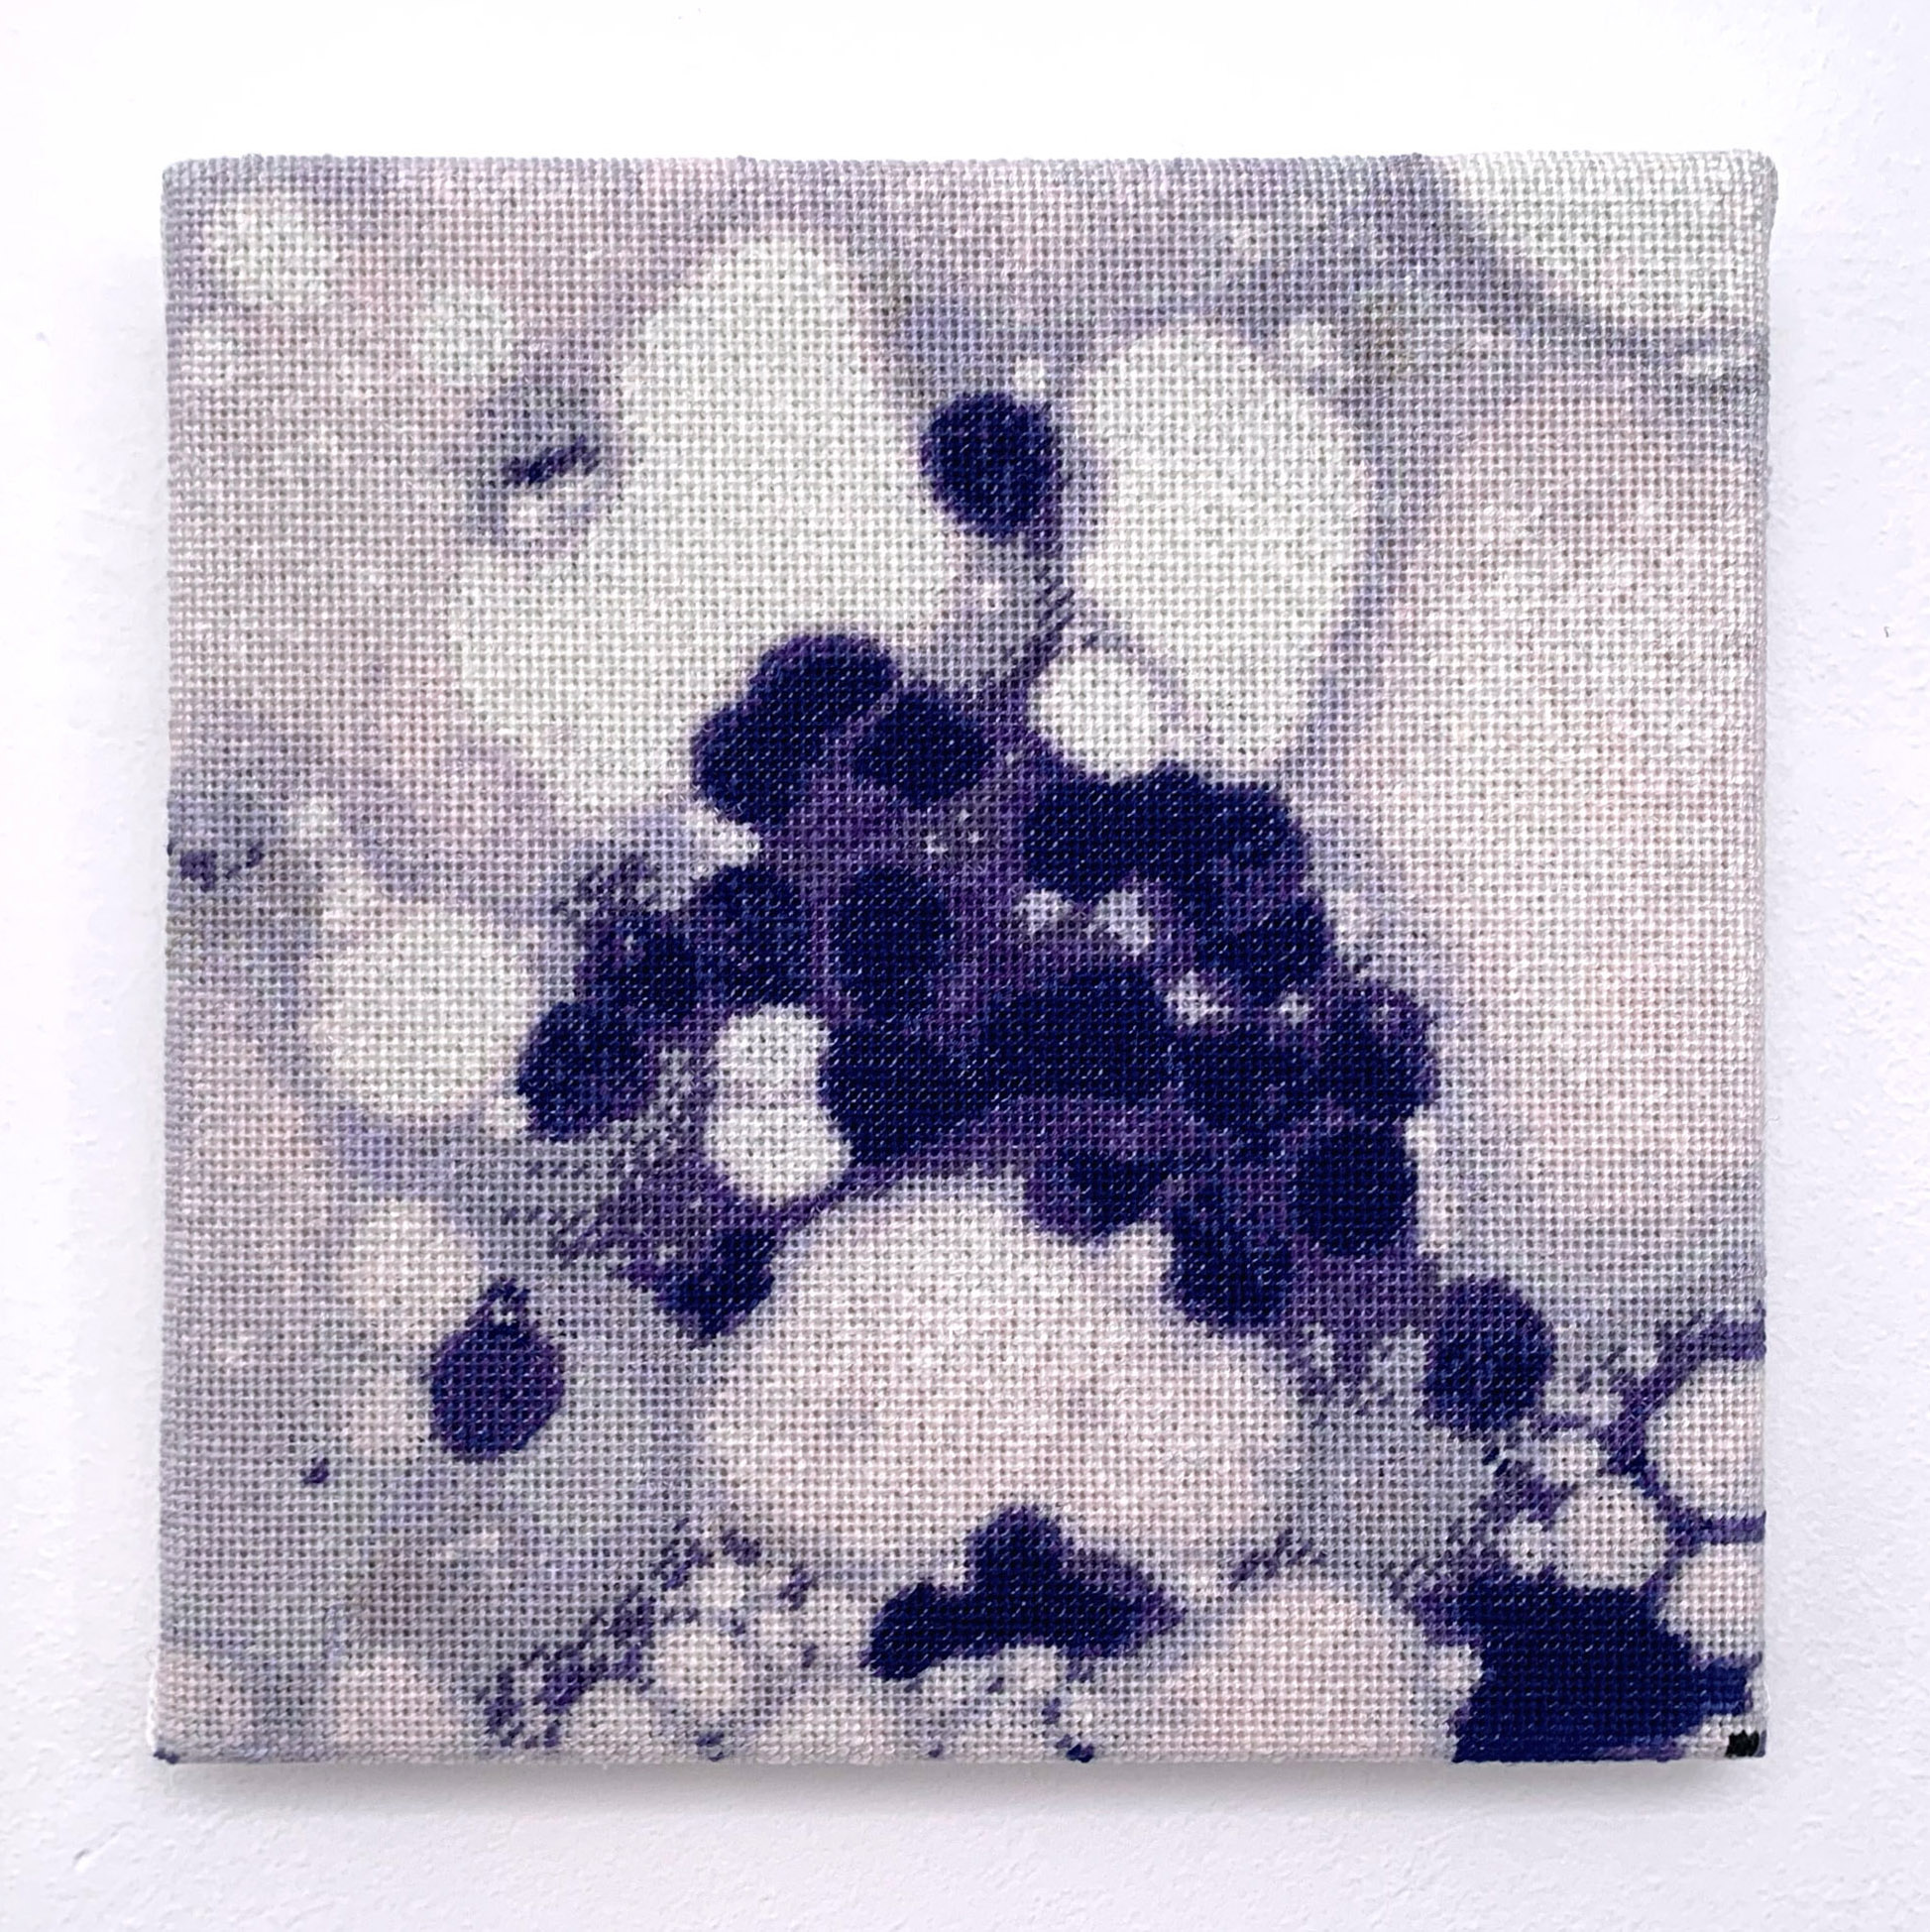  / Embroidered representation of epithelial cells arranged in groups or as single cells in a mucoid material. Art by artist Marine Beaufils.